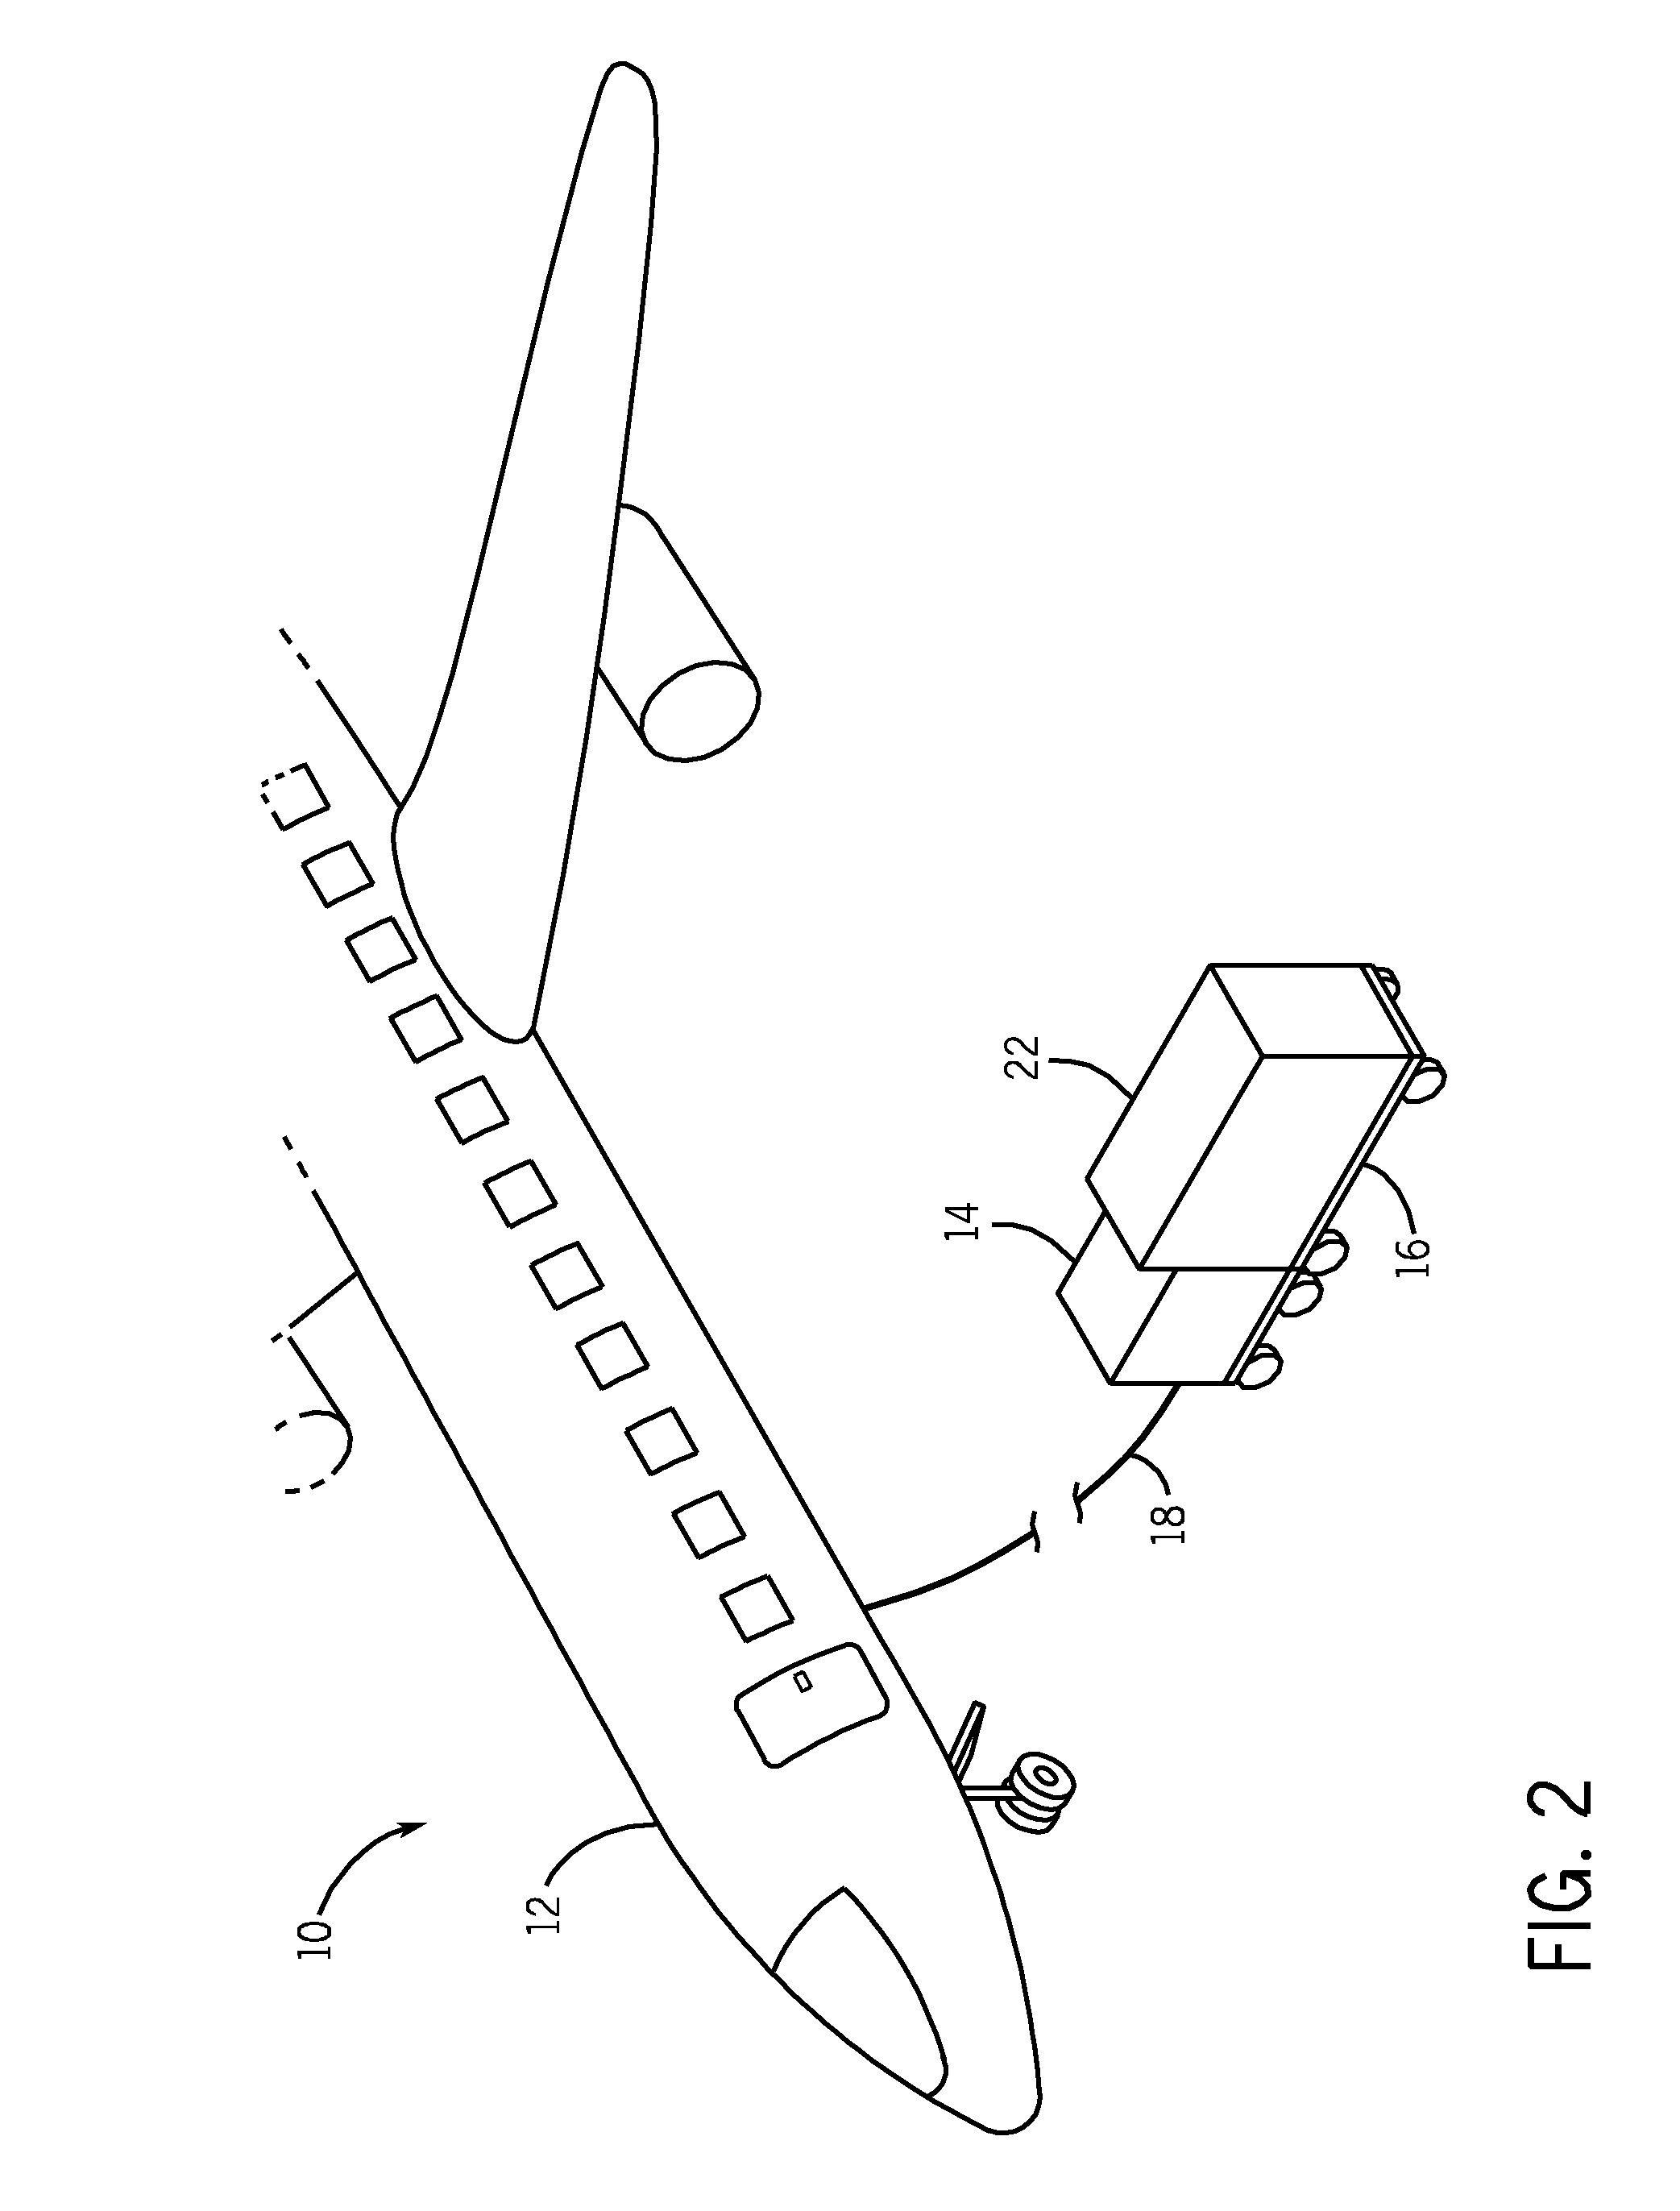 Ground power unit for aircraft